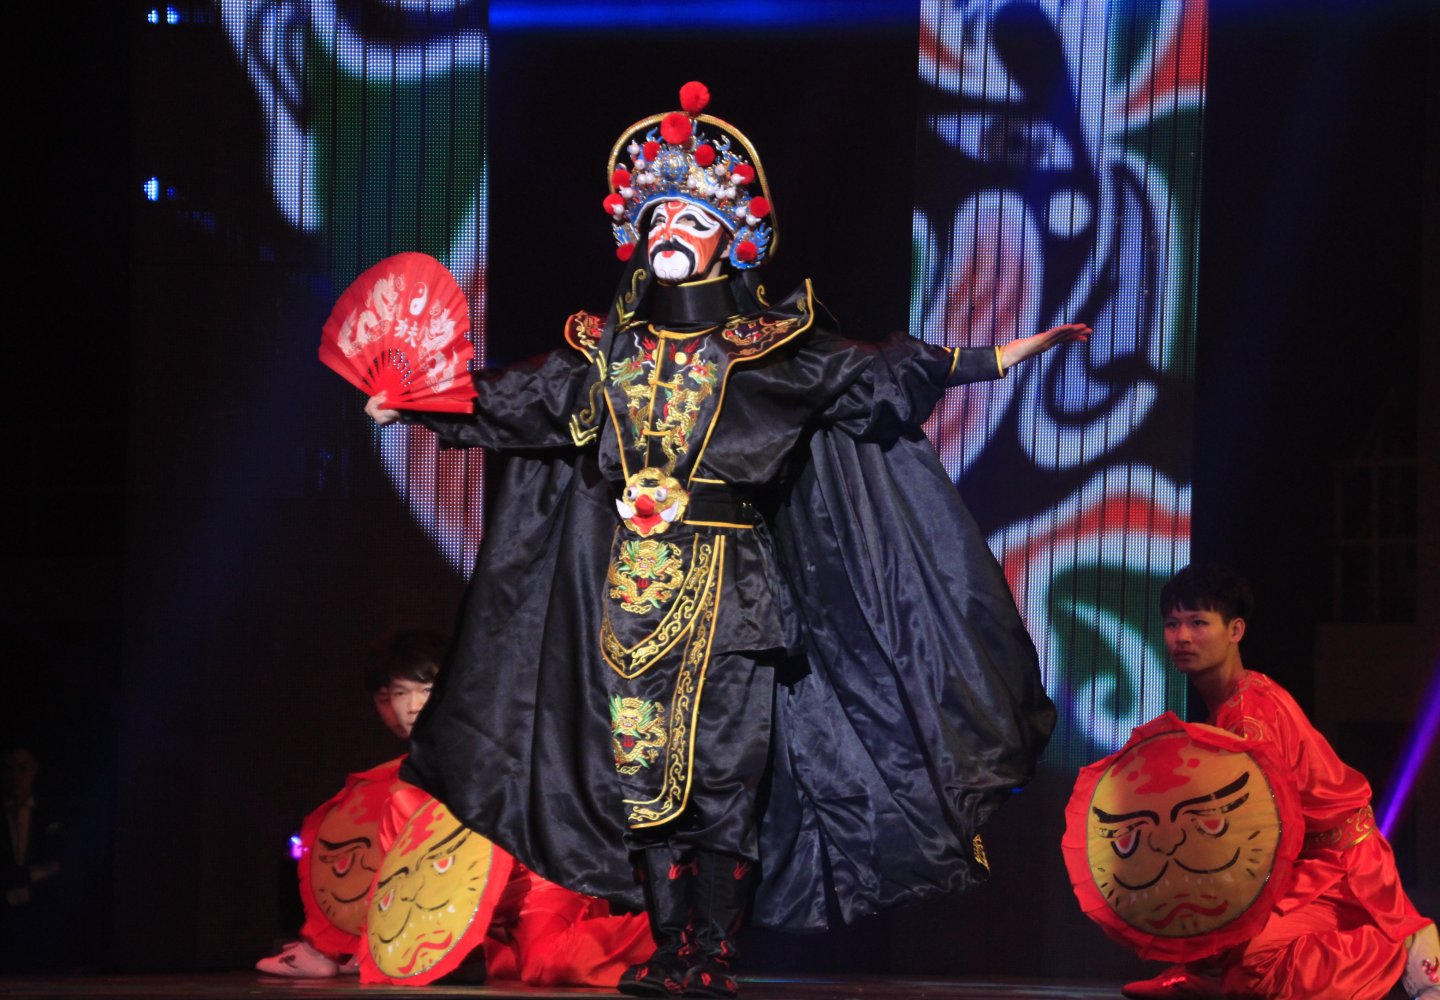 Three performers wear traditional asian attire on stage during theater performance